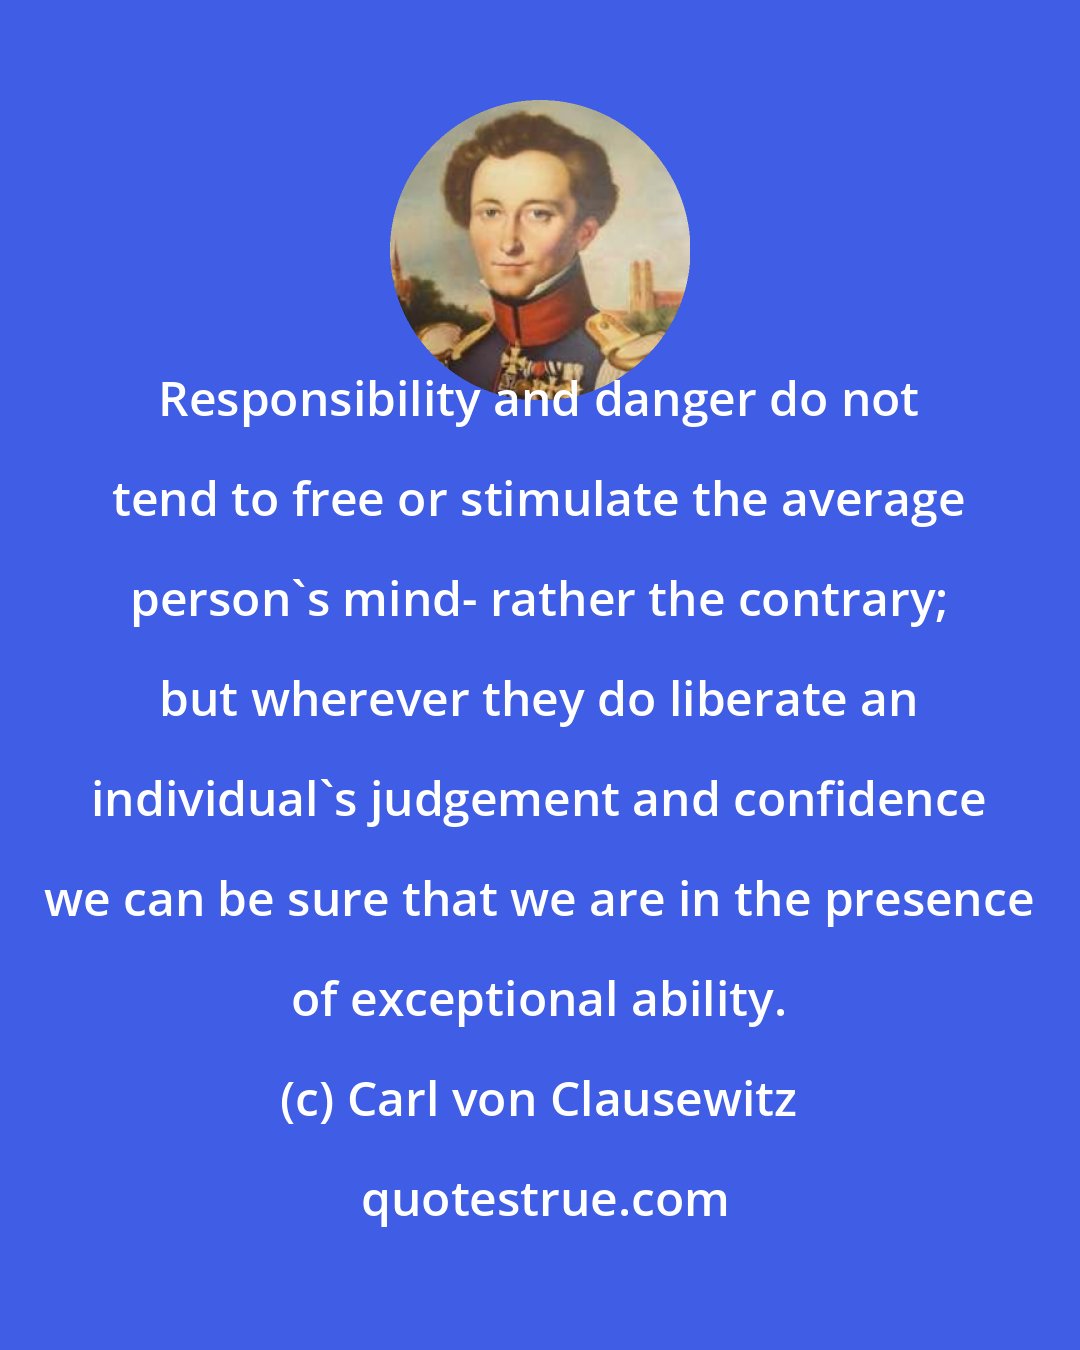 Carl von Clausewitz: Responsibility and danger do not tend to free or stimulate the average person's mind- rather the contrary; but wherever they do liberate an individual's judgement and confidence we can be sure that we are in the presence of exceptional ability.